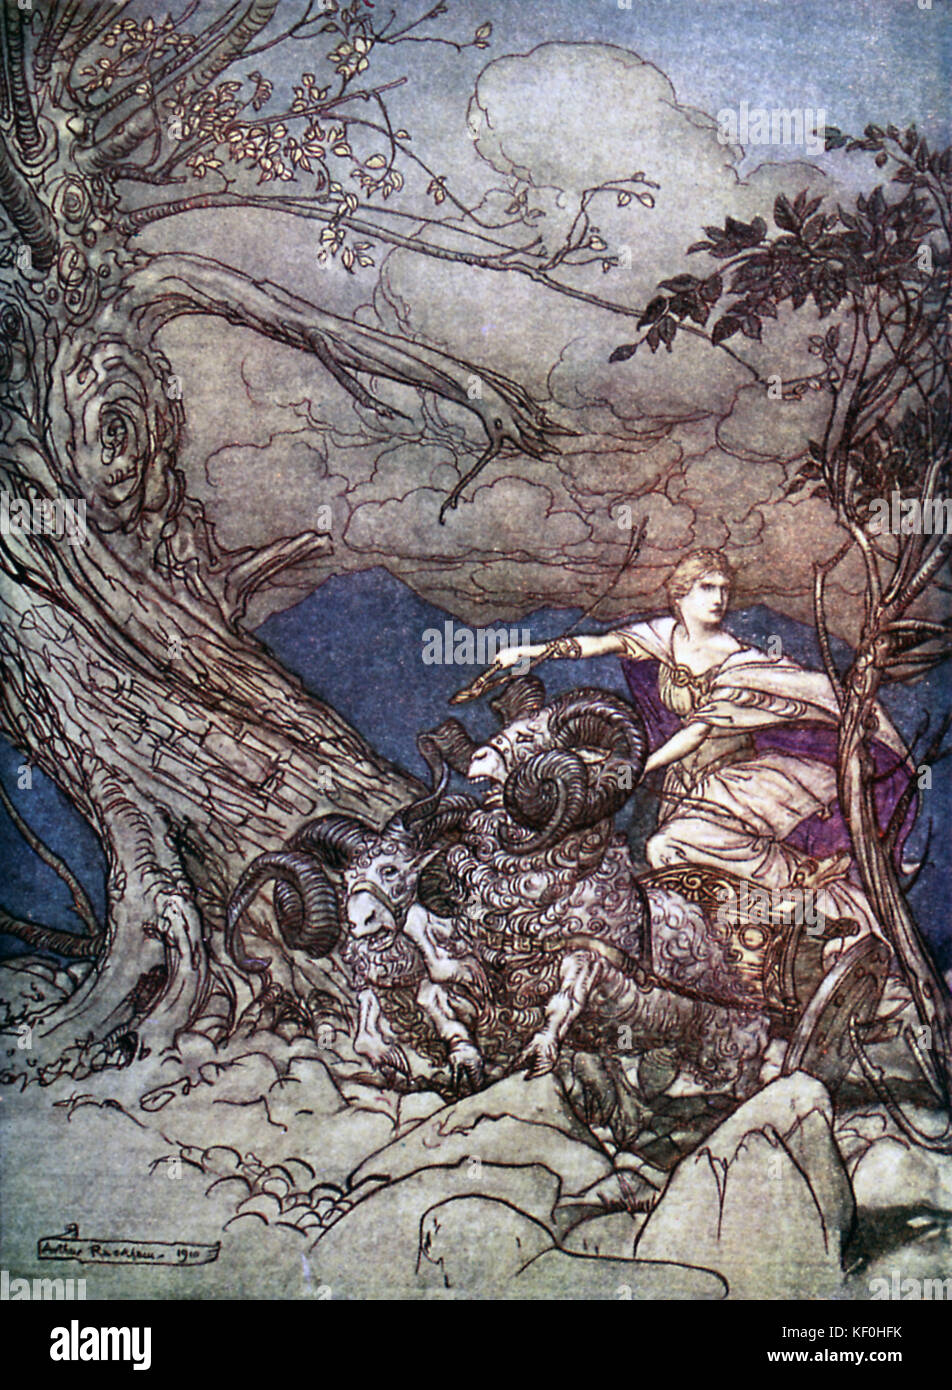 The Valkyrie / Das Walküre by Richard Wagner. Fricka, the West Germanic goddess of marriage, rides in a chariot pulled by rams.  Illustration by Arthur Rackham 1867 - 1939.  Caption:  'Fricka approaches in anger' Act 2.  From 'The Ring Cycle' / 'Der Ring des Nibelungen'.  RW German composer & author, 22 May 1813 - 13 February 1883. Stock Photo